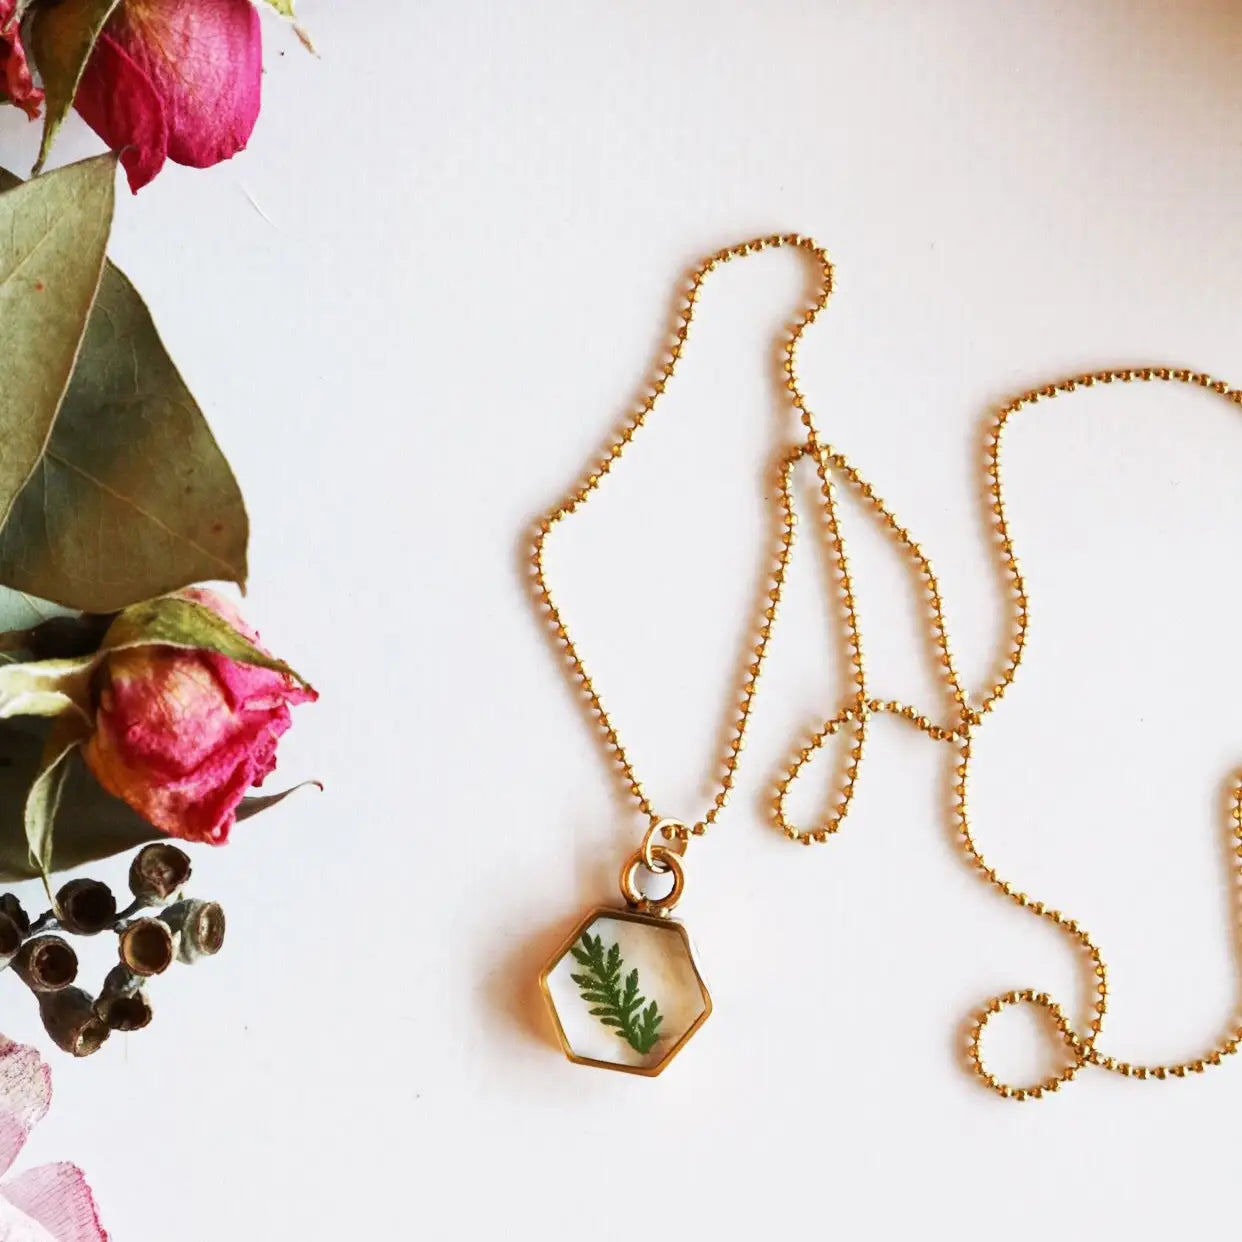 Fern gold necklace